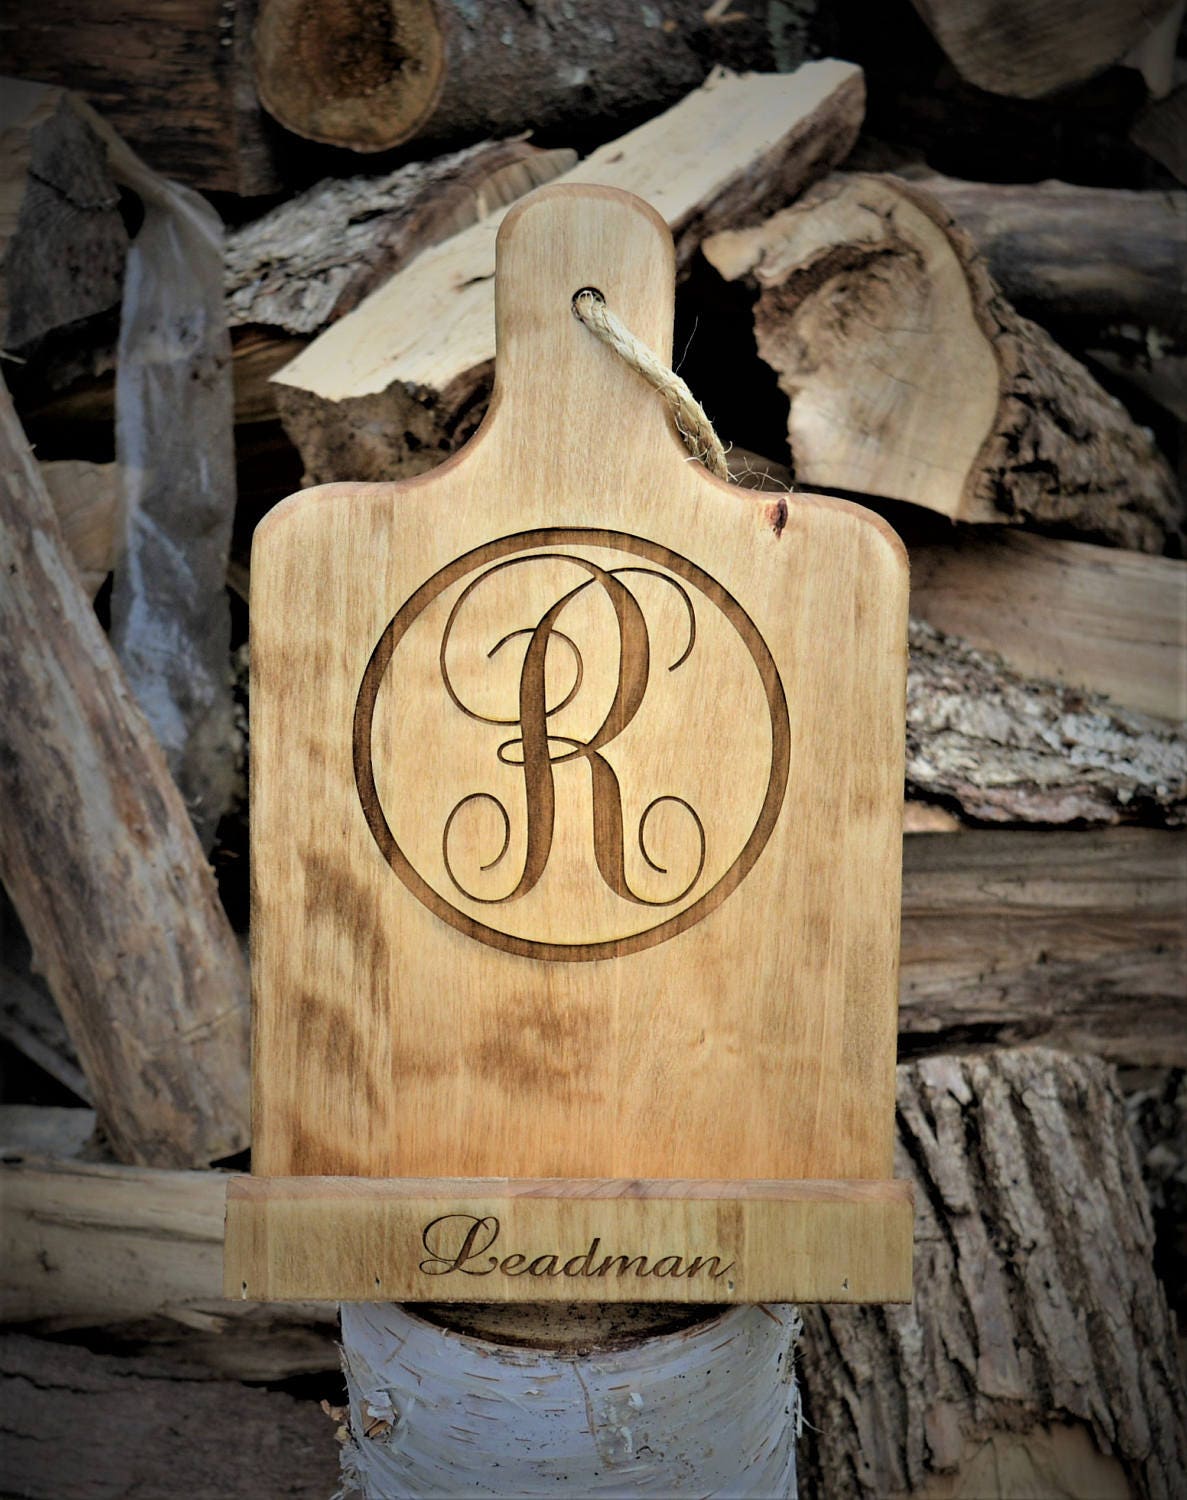 Personalized Wood Recipe Box - Engraved Custom Kitchen Gifts